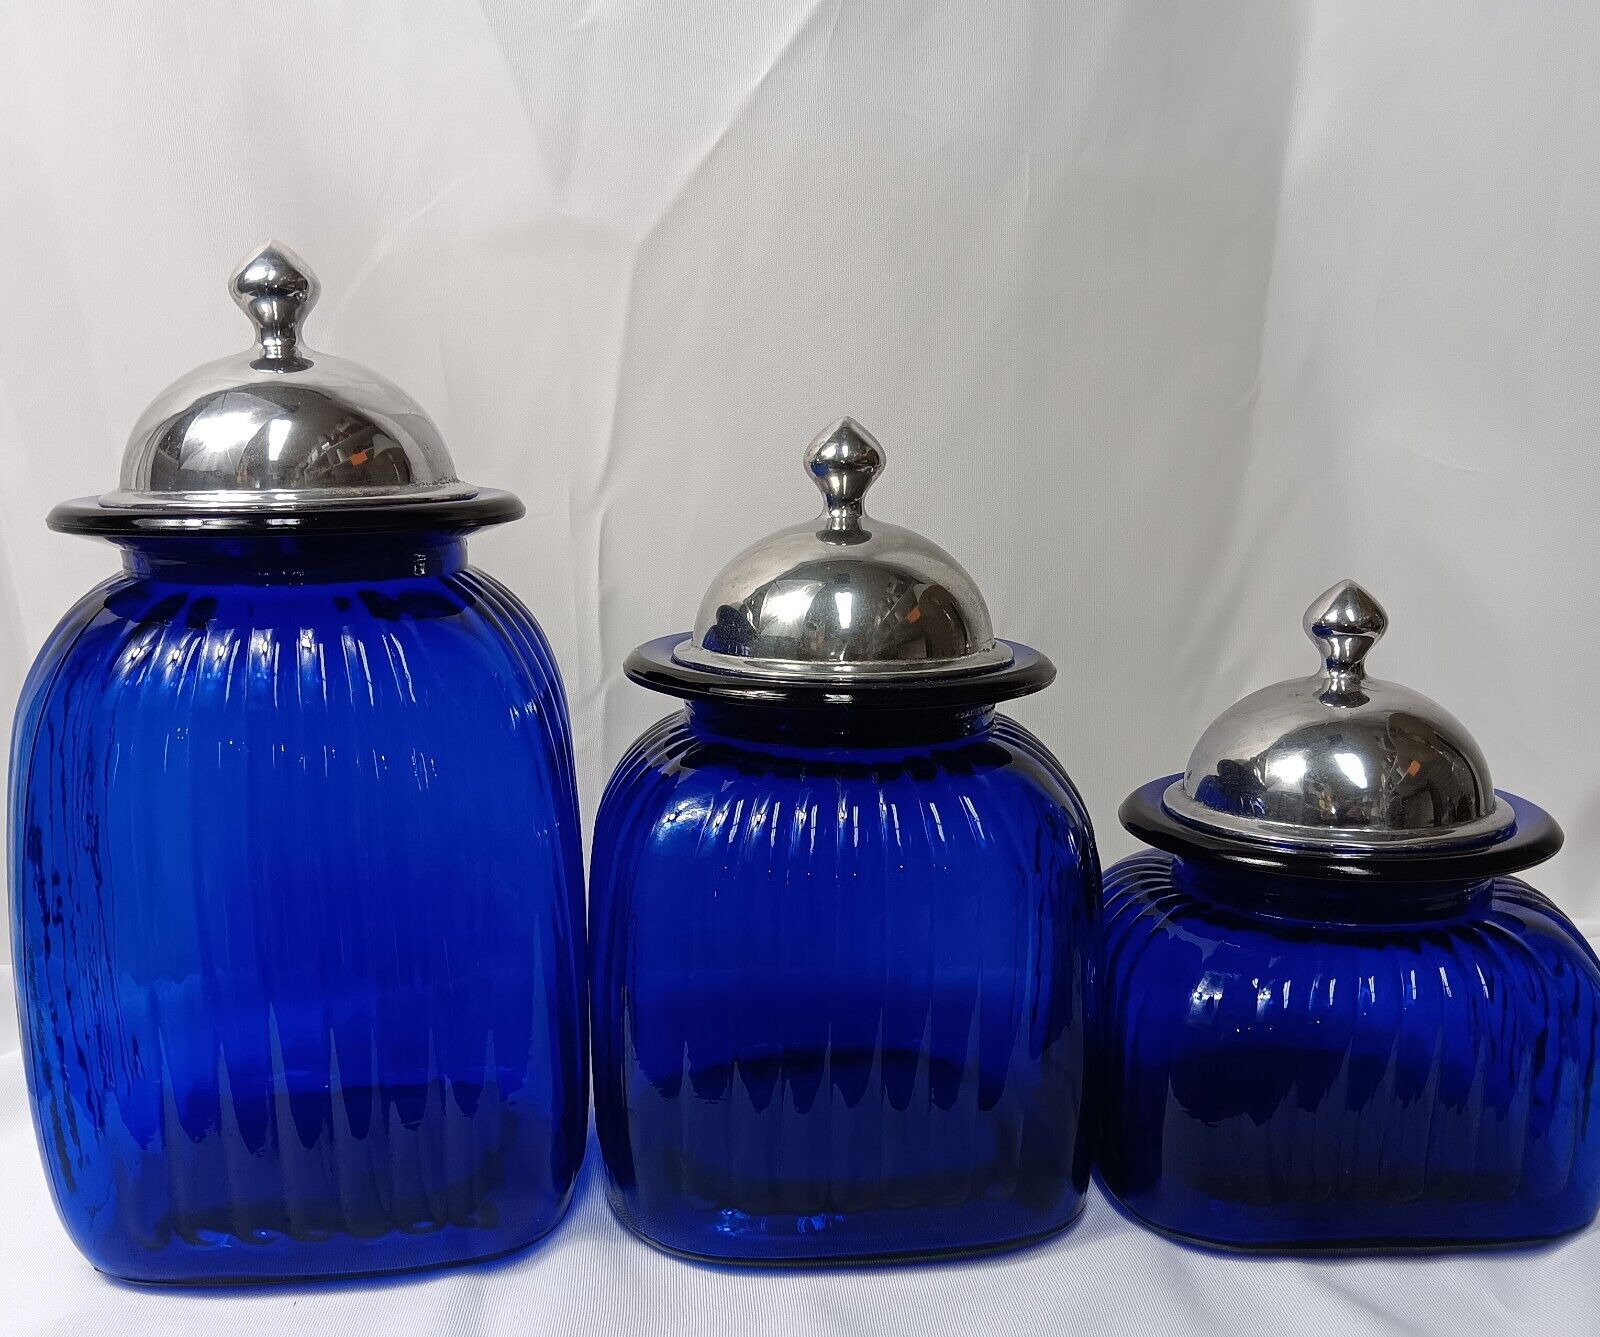 Vtg Artland Apothecary Canister Pewter Lid Cobalt Blue Glass $110.50 OBO {ch}